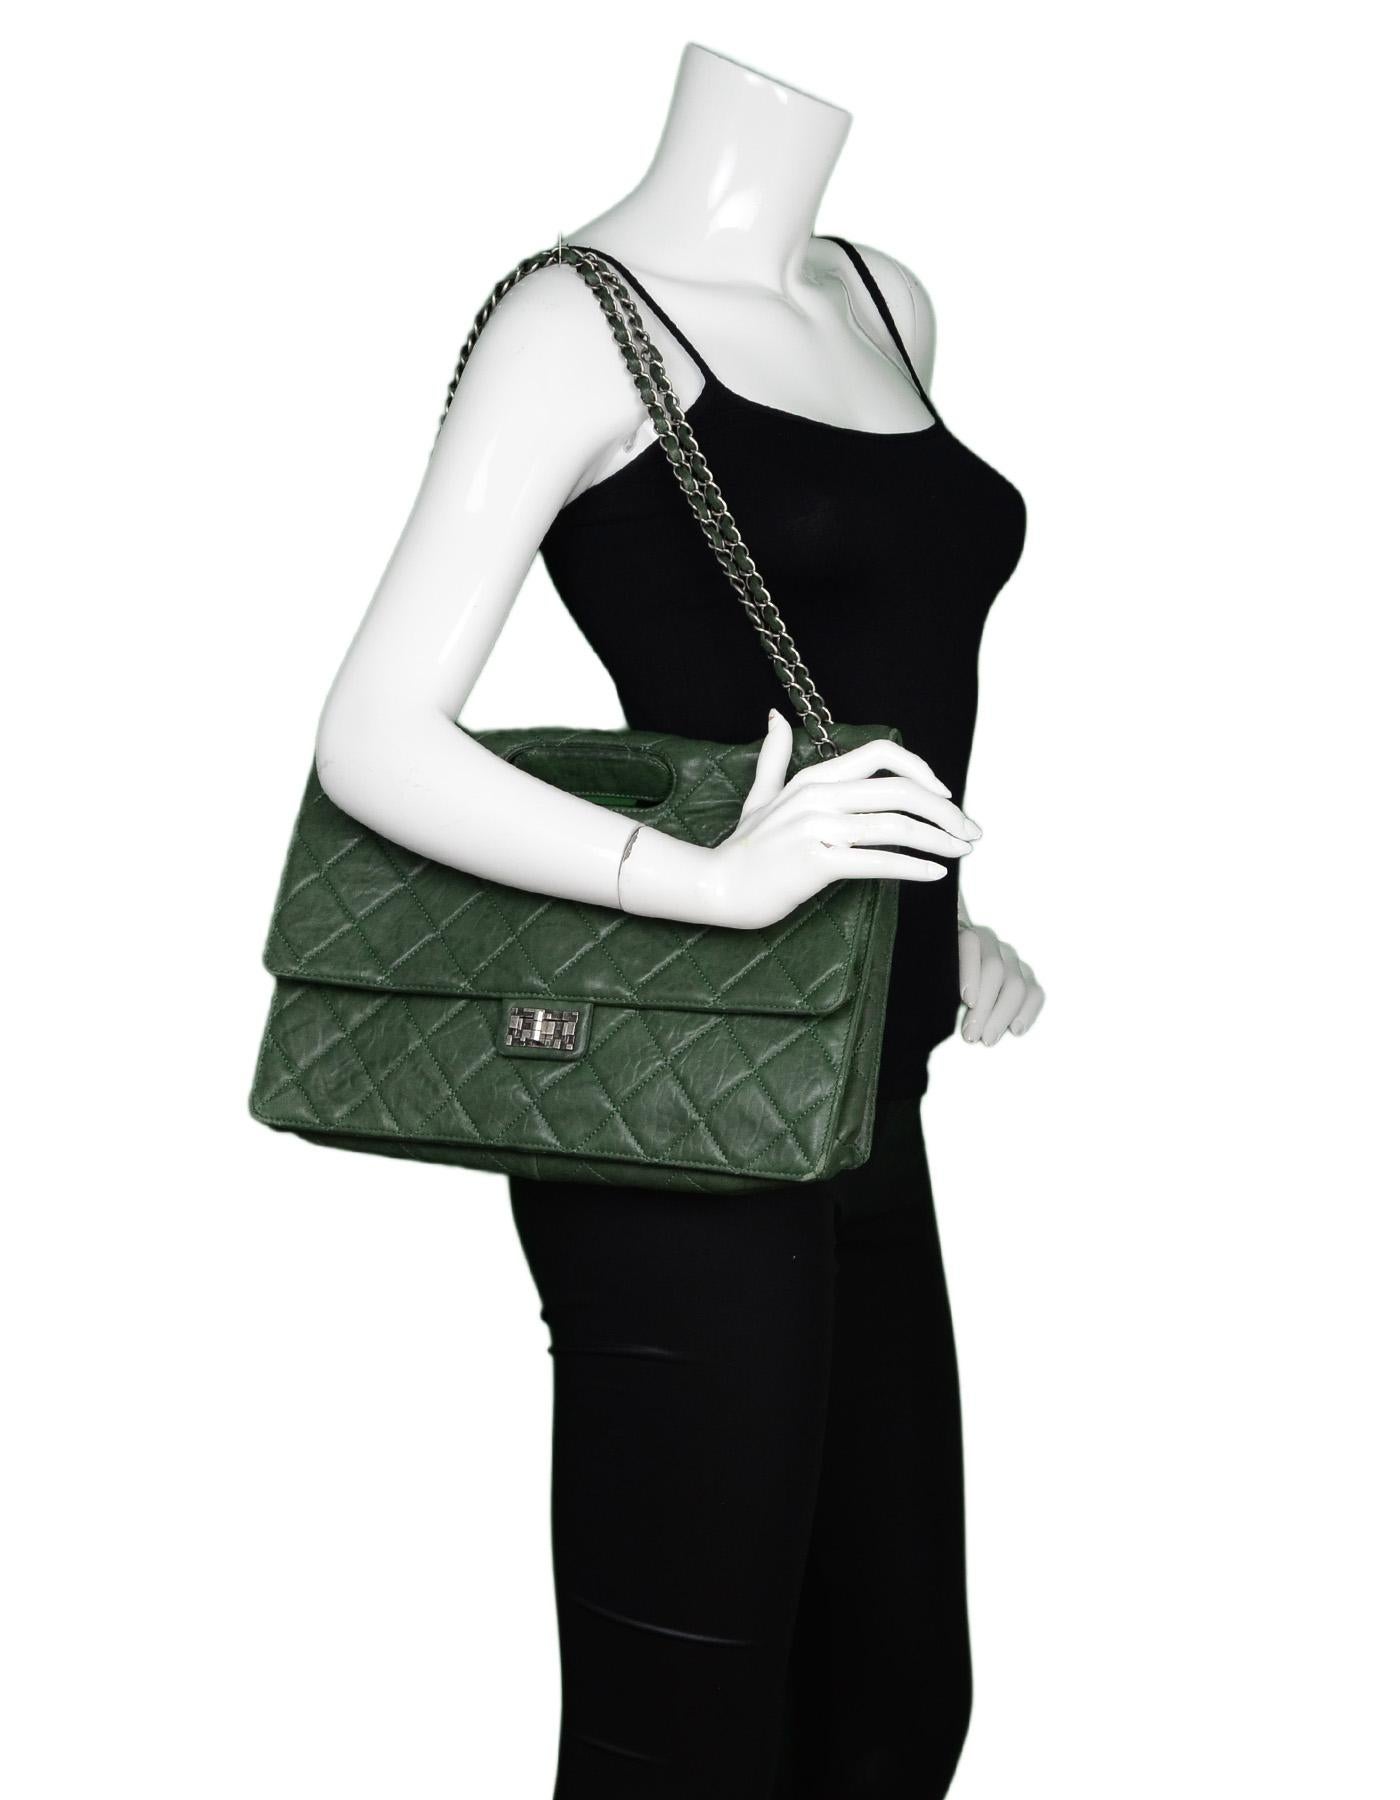 Chanel Green Calf Leather Quilted Paris-Byzance Take Away 2.55 Reissue Flap Bag W/ Dust Bag

Made In: Italy
Year of Production: 2011
Color: Green
Hardware: Antiqued silvertone
Materials: Calfskin leather, antiqued silvertone metal 
Lining: Black